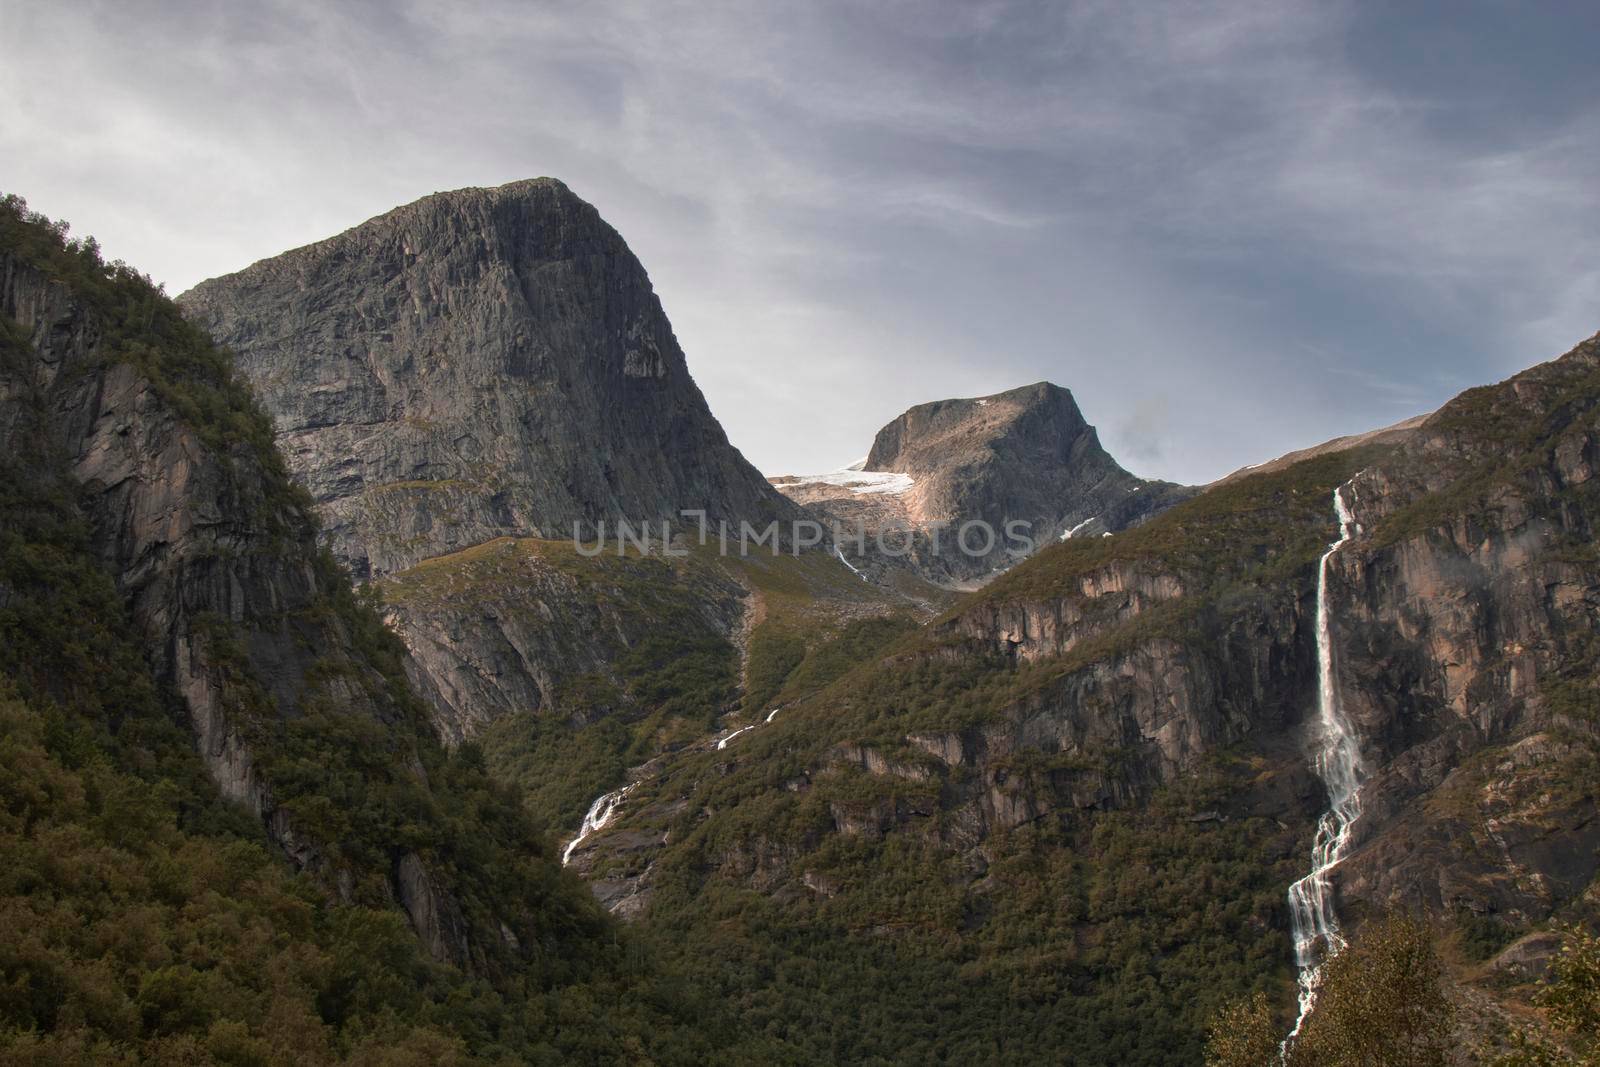 Landscape showing some peaks and a thin waterfall in Norway